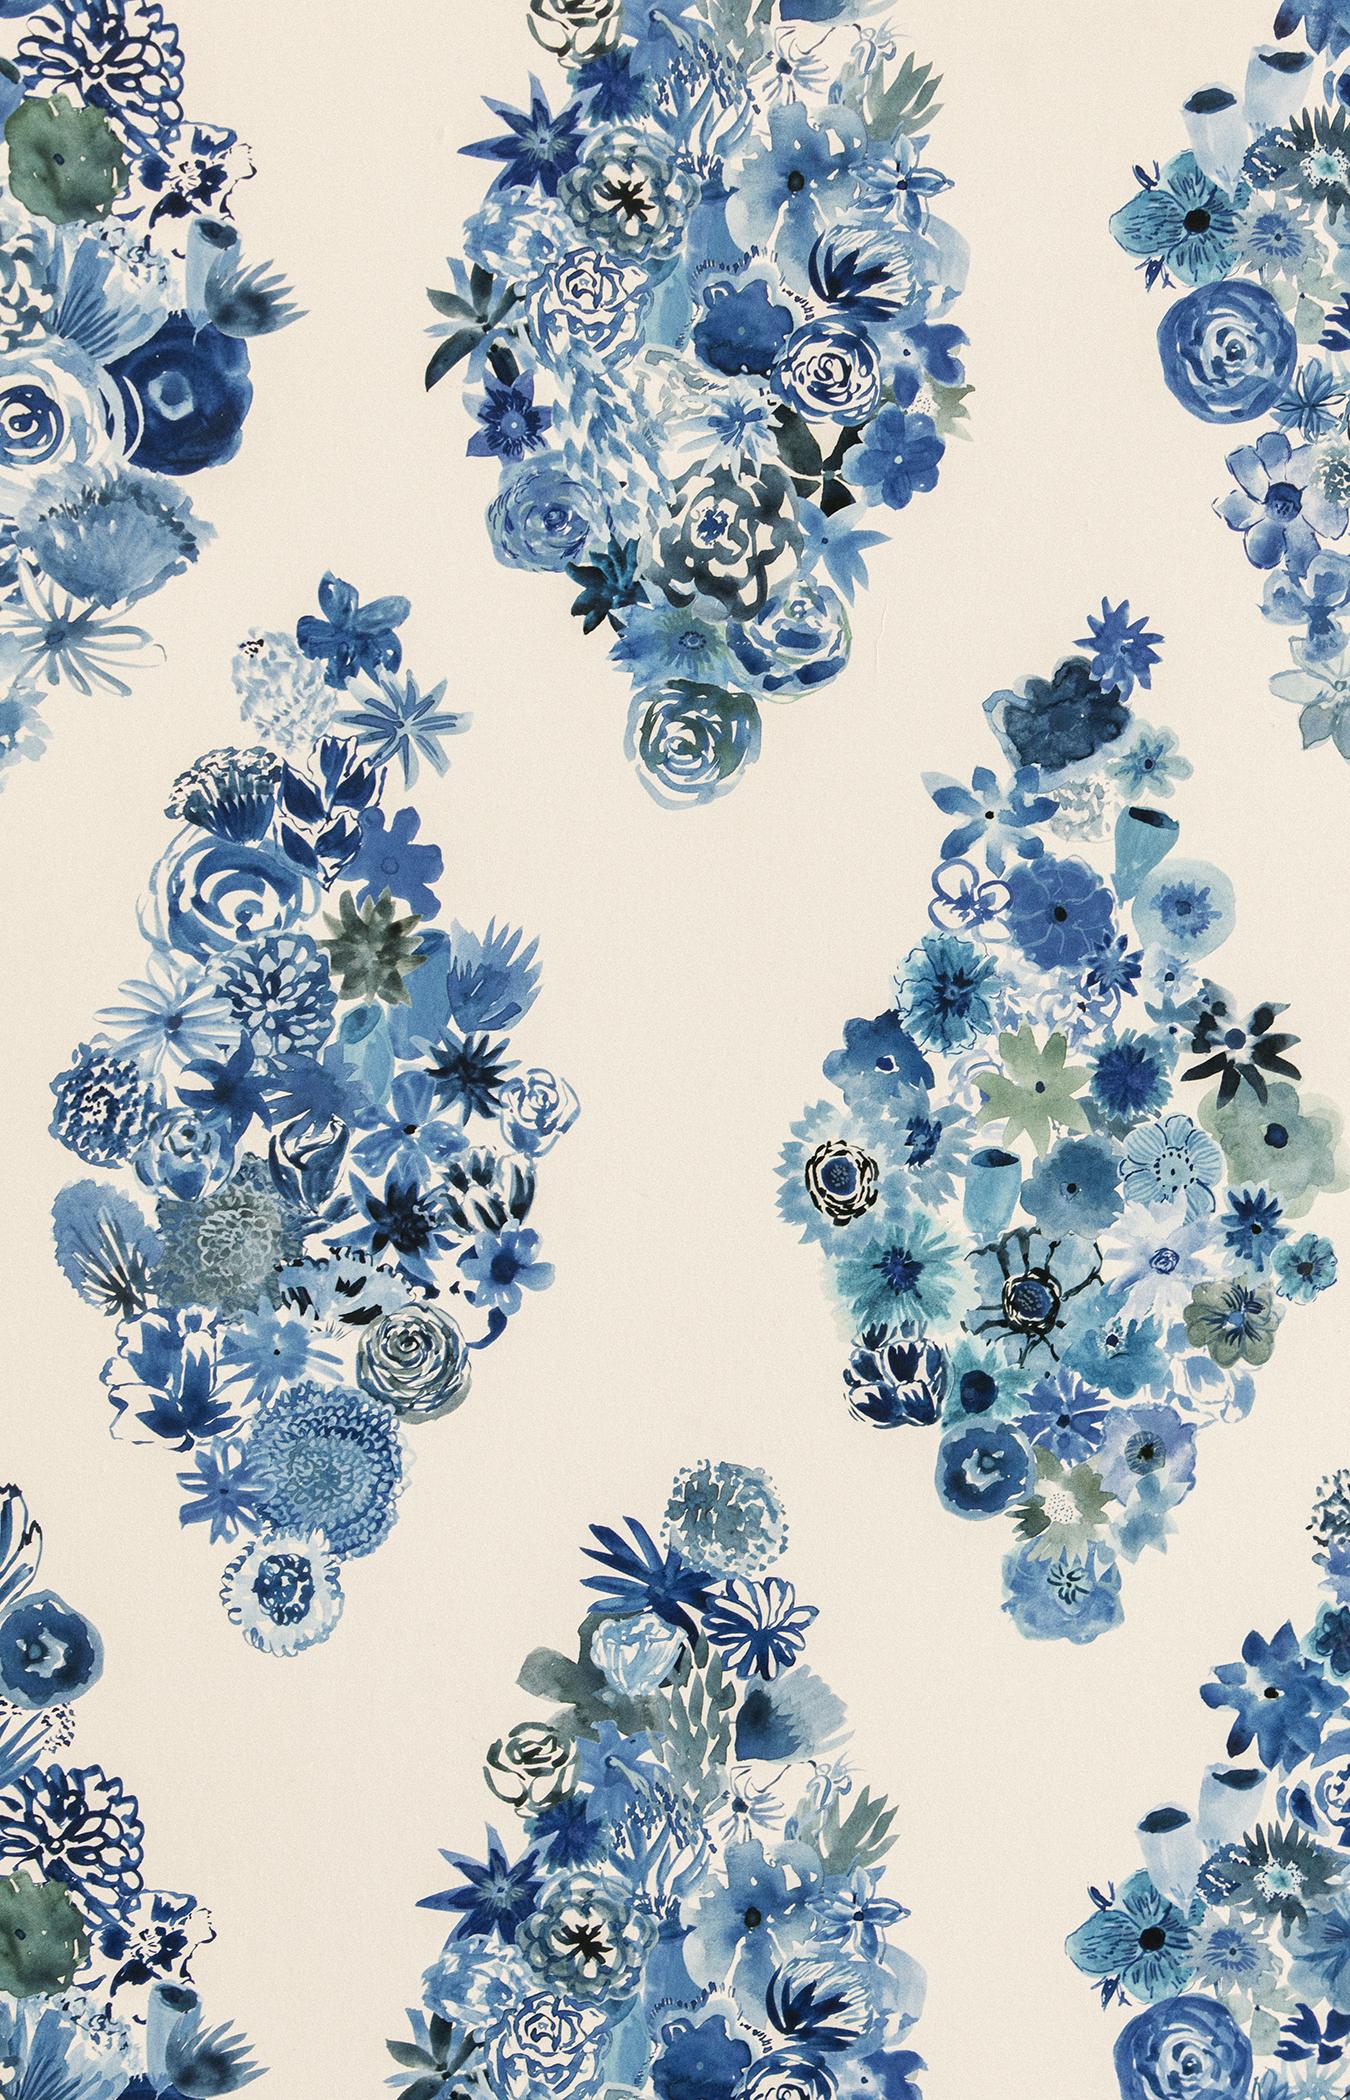 “Flora” in ‘Casbah Blue’ is a floral wallpaper designed by Flat Vernacular. Featuring shades of ultramarine, navy, manganese blue, and pool blue, this painterly pattern is comprised of many kinds of real (and imaginary) flowers arranged in diamond